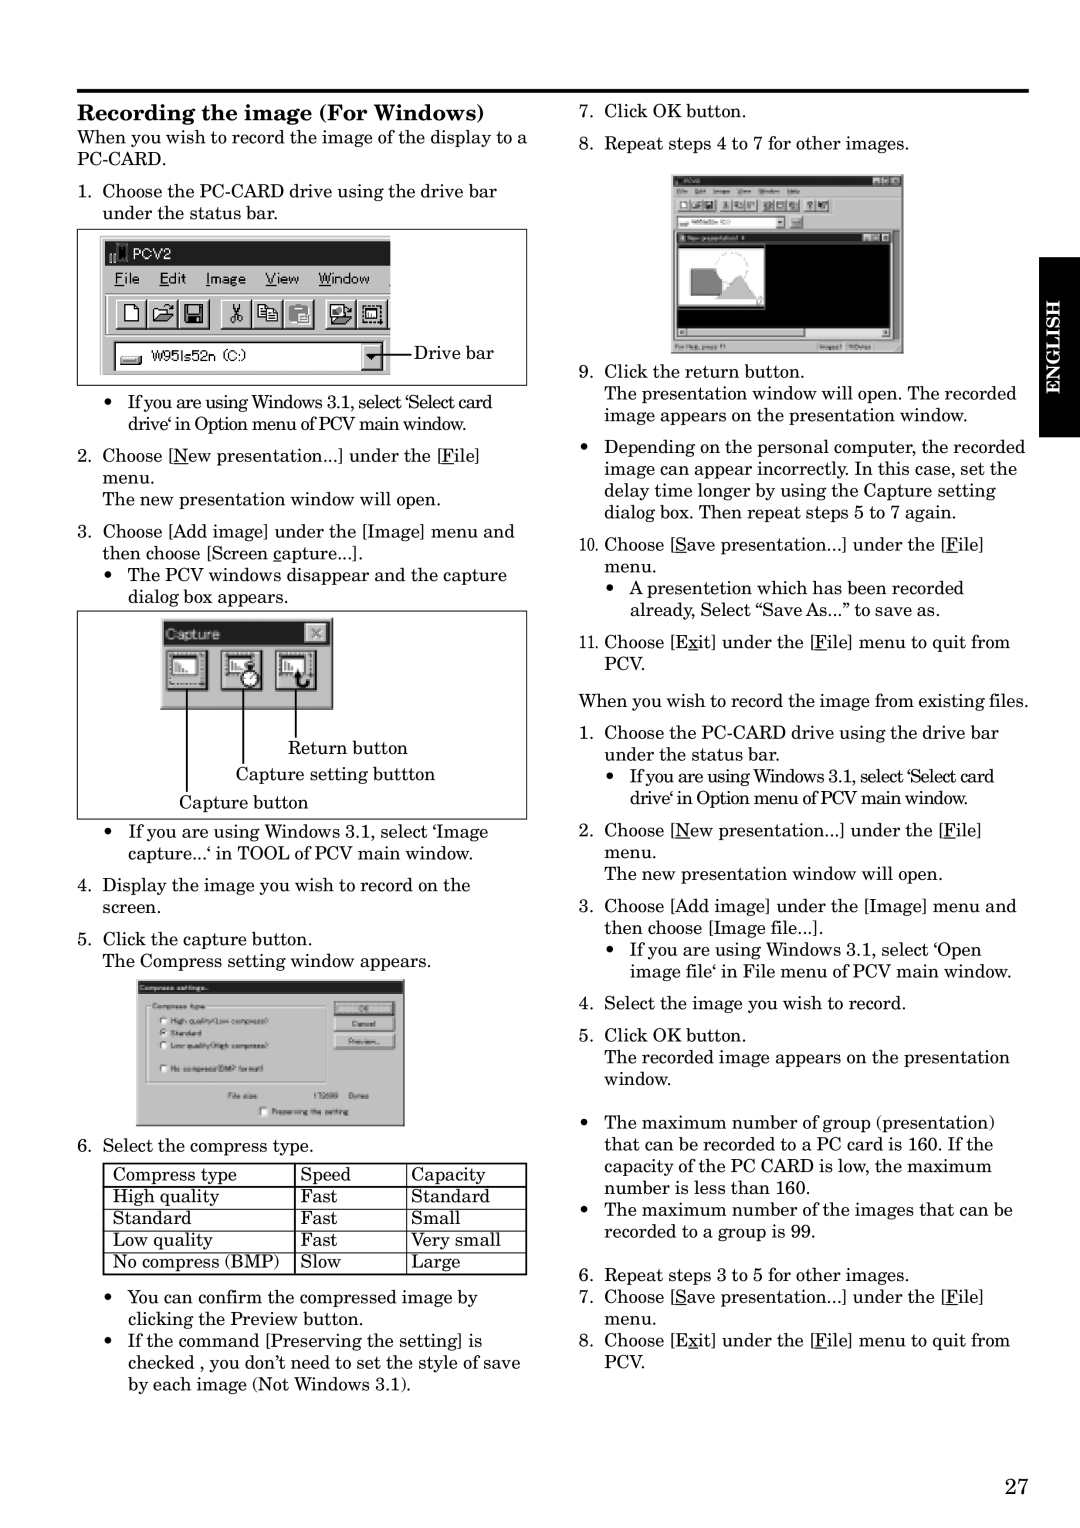 Mitsubishi Electronics LVP-S120A user manual Recording the image For Windows 